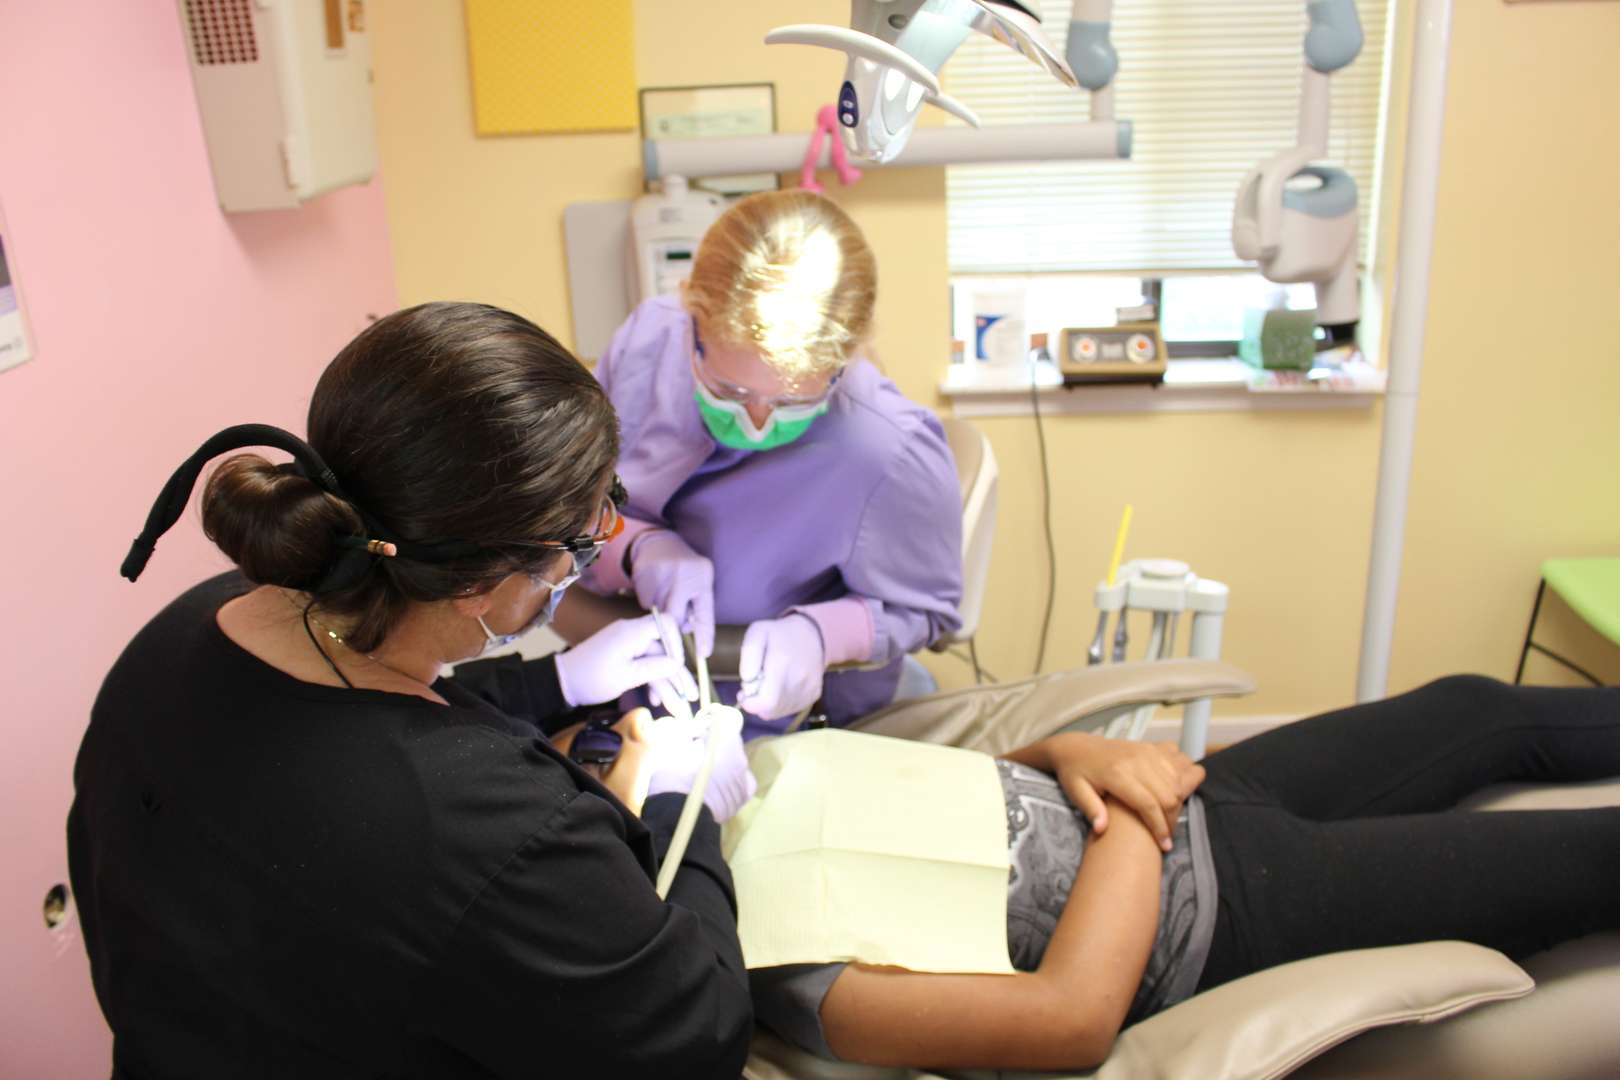 Pediatric Dental Center that accepts Medicaid and uninsured